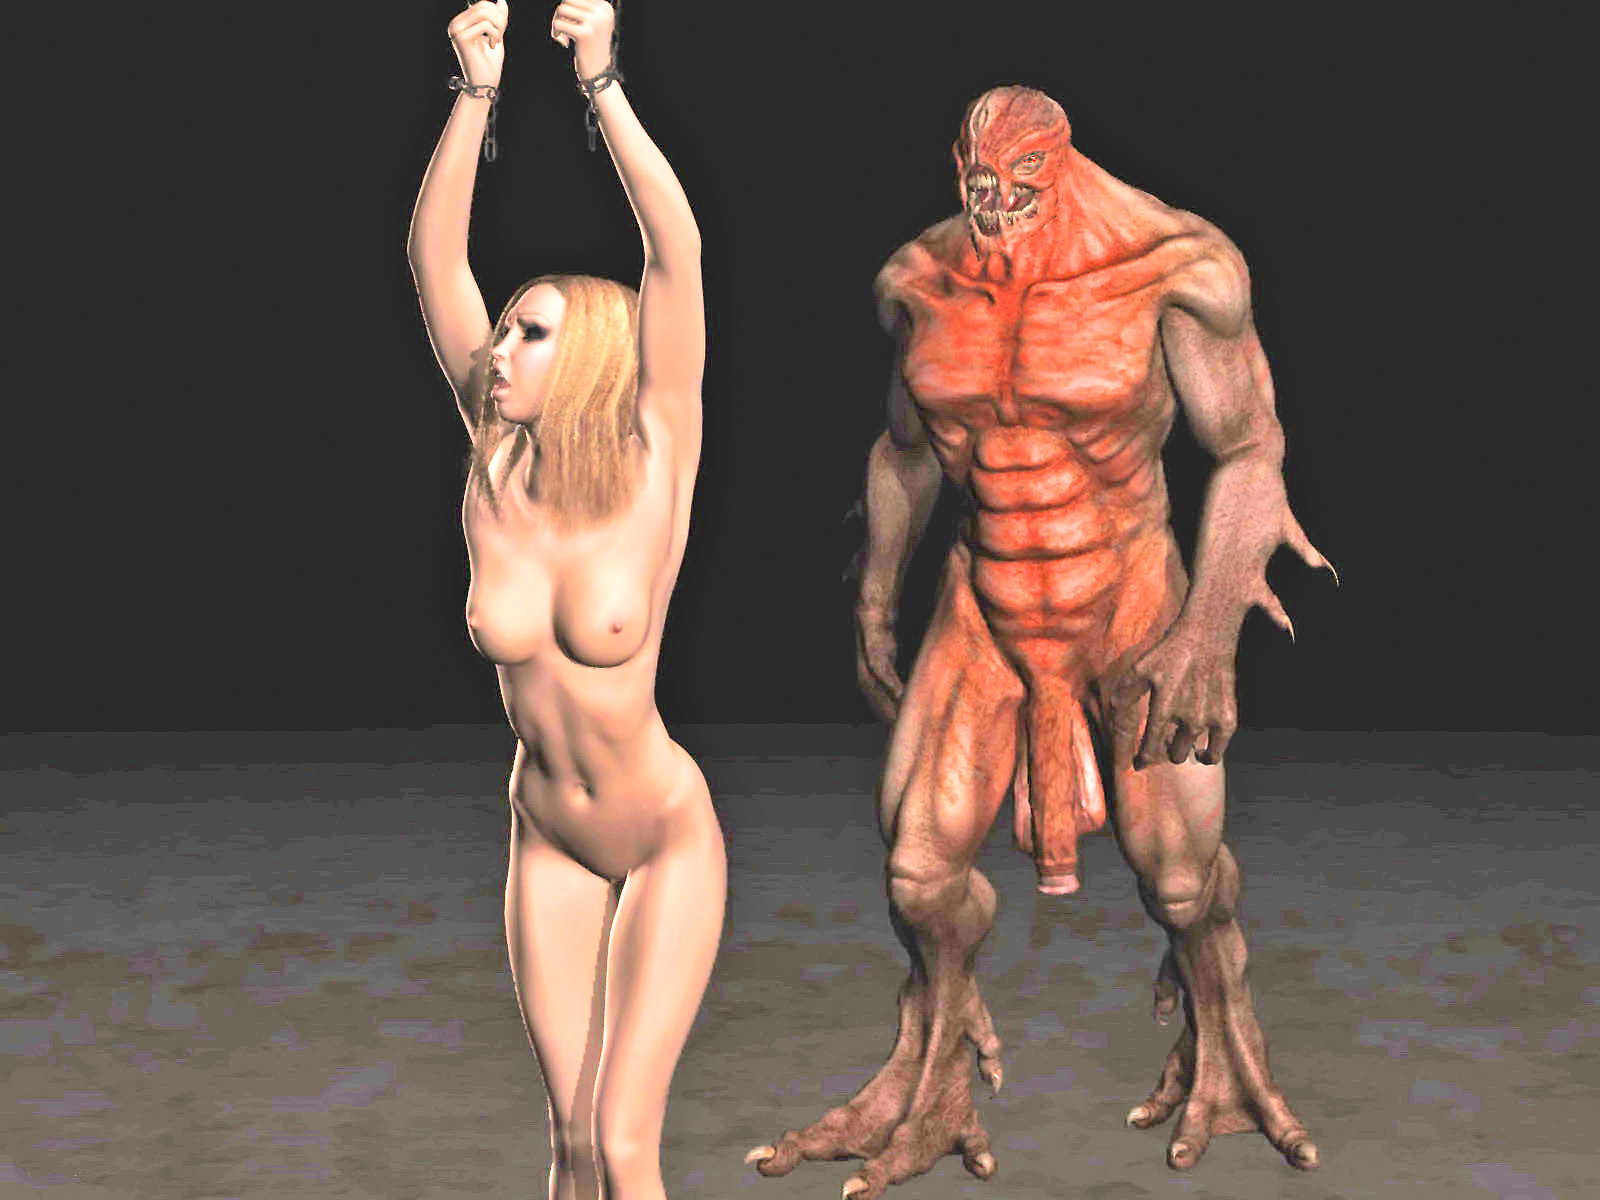 1600px x 1200px - Demons and ogres ravaging babes - erotic 3d art monster at  Hd3dMonsterSex.com